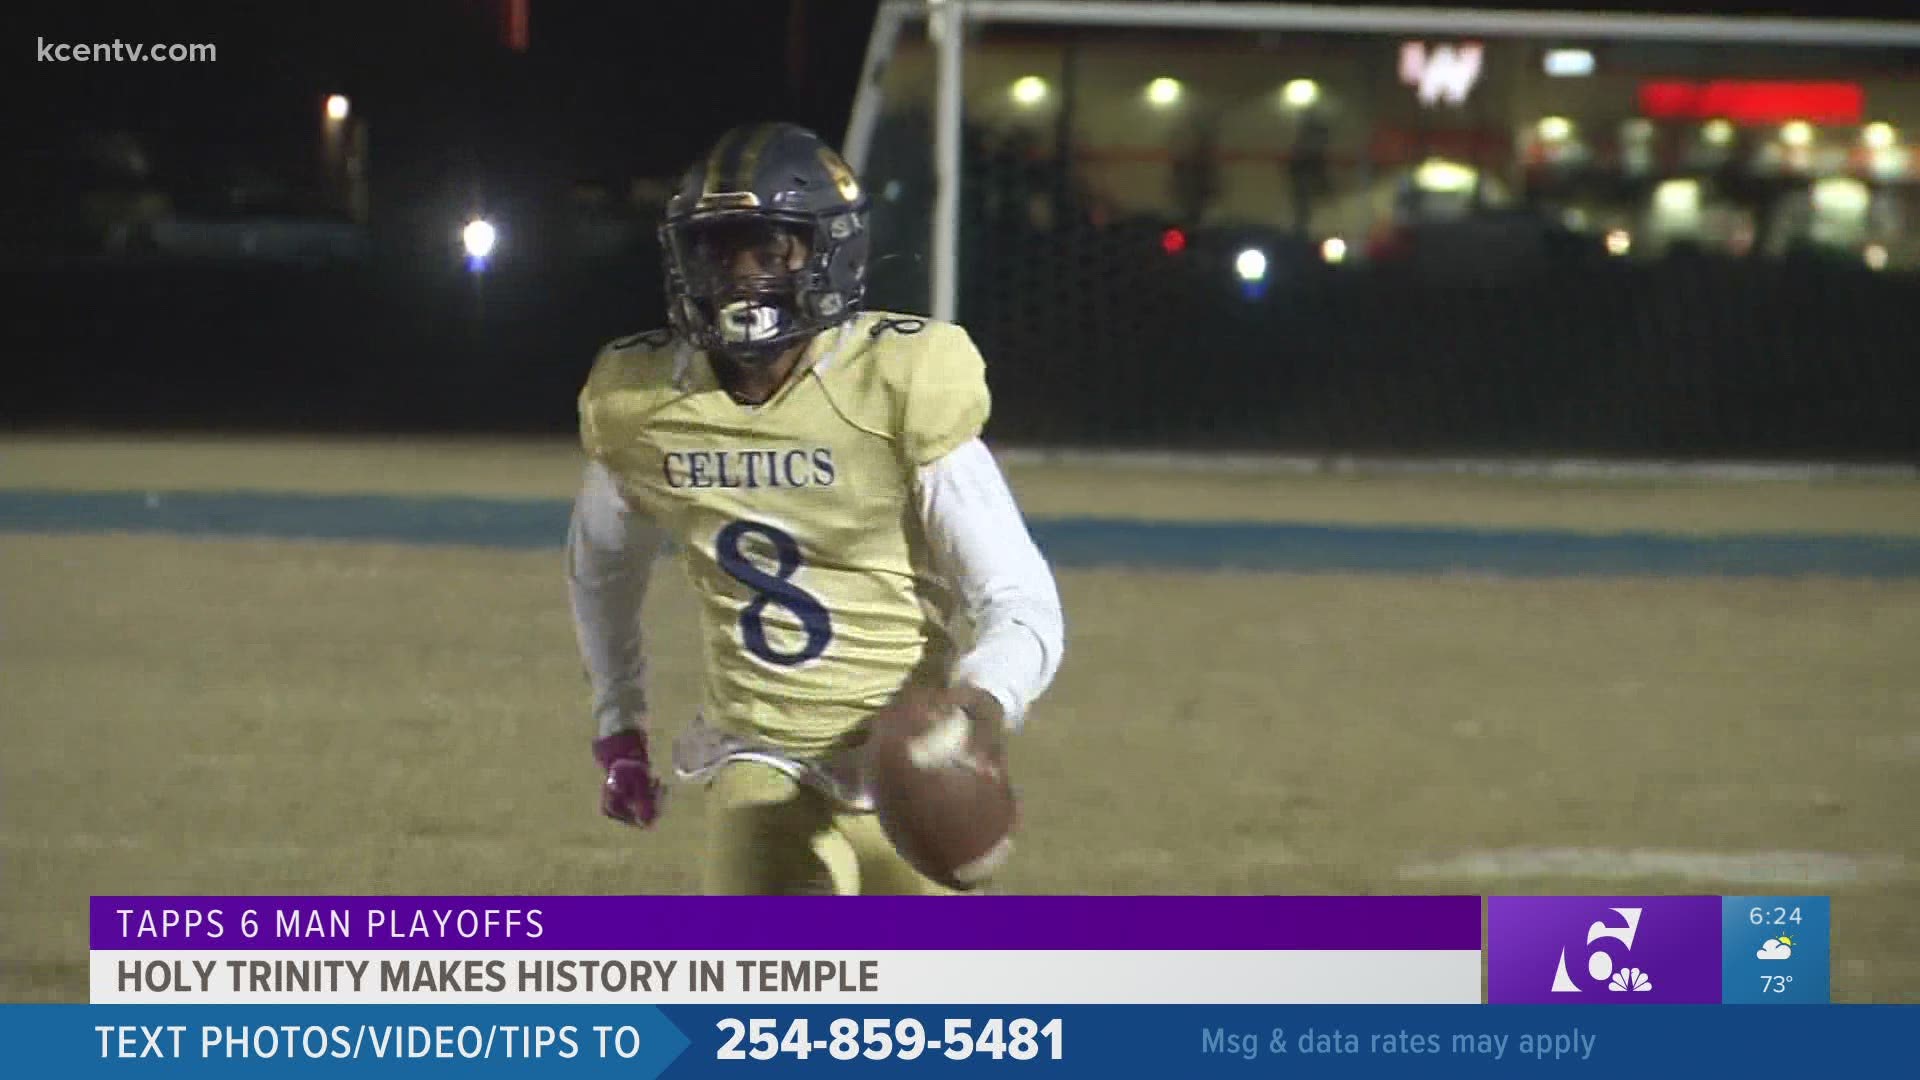 Both schools made history by winning their first playoff games Friday night.